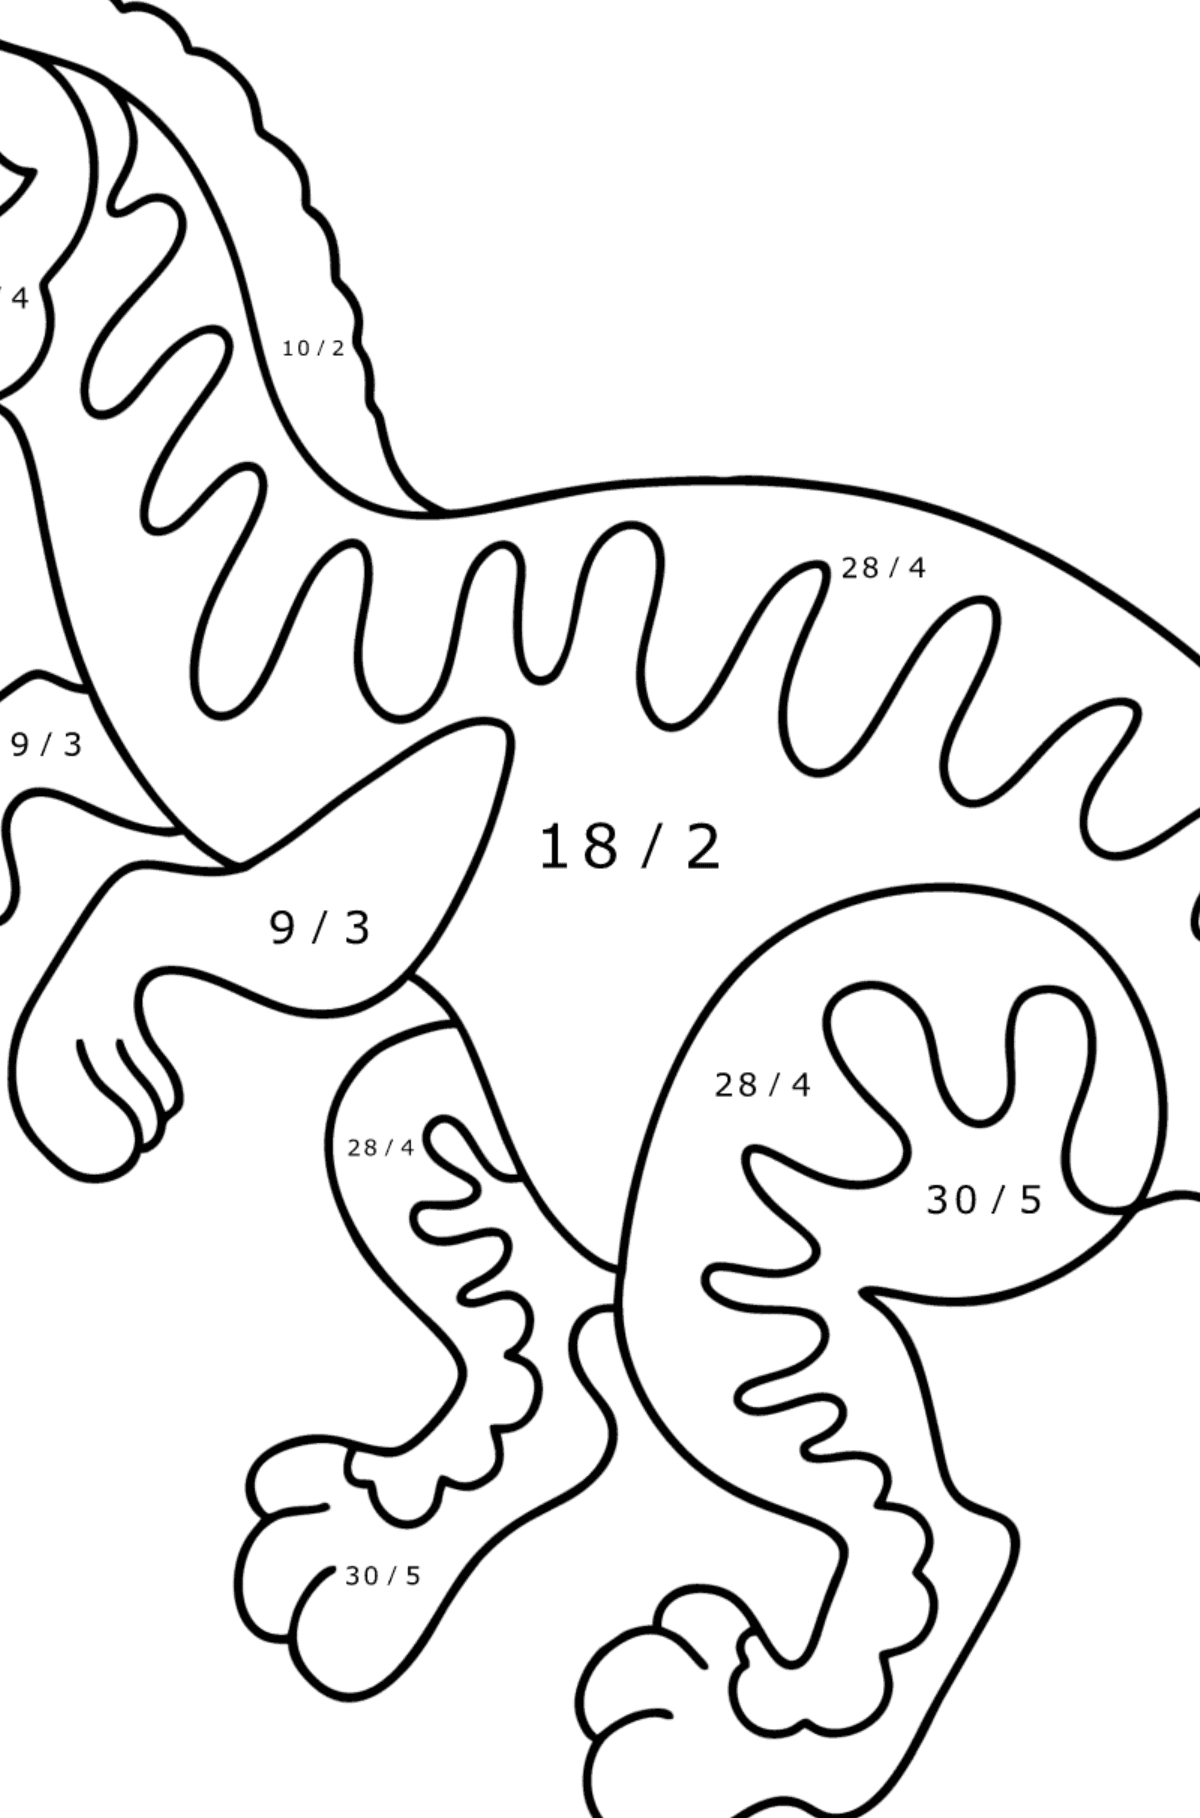 Velociraptor coloring page - Math Coloring - Division for Kids